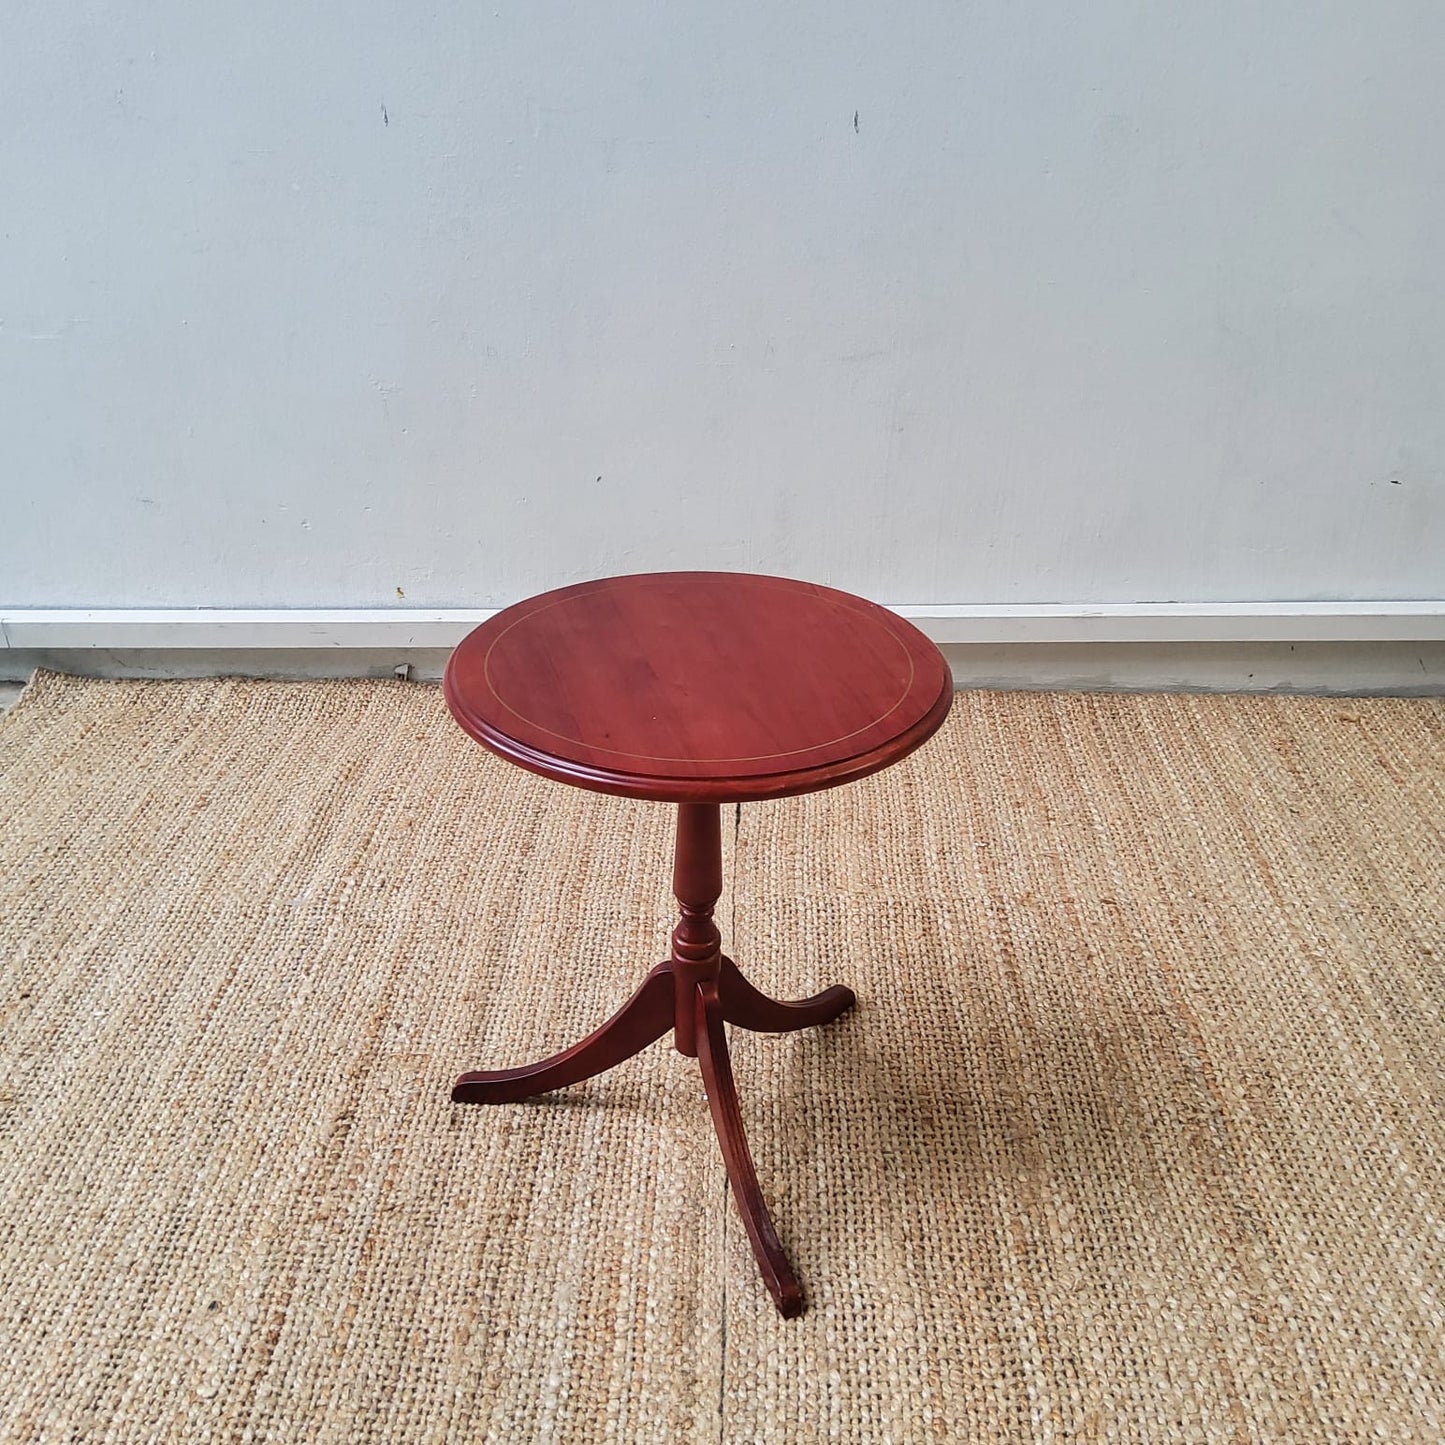 Mahogany Vintage side table with Inliad top